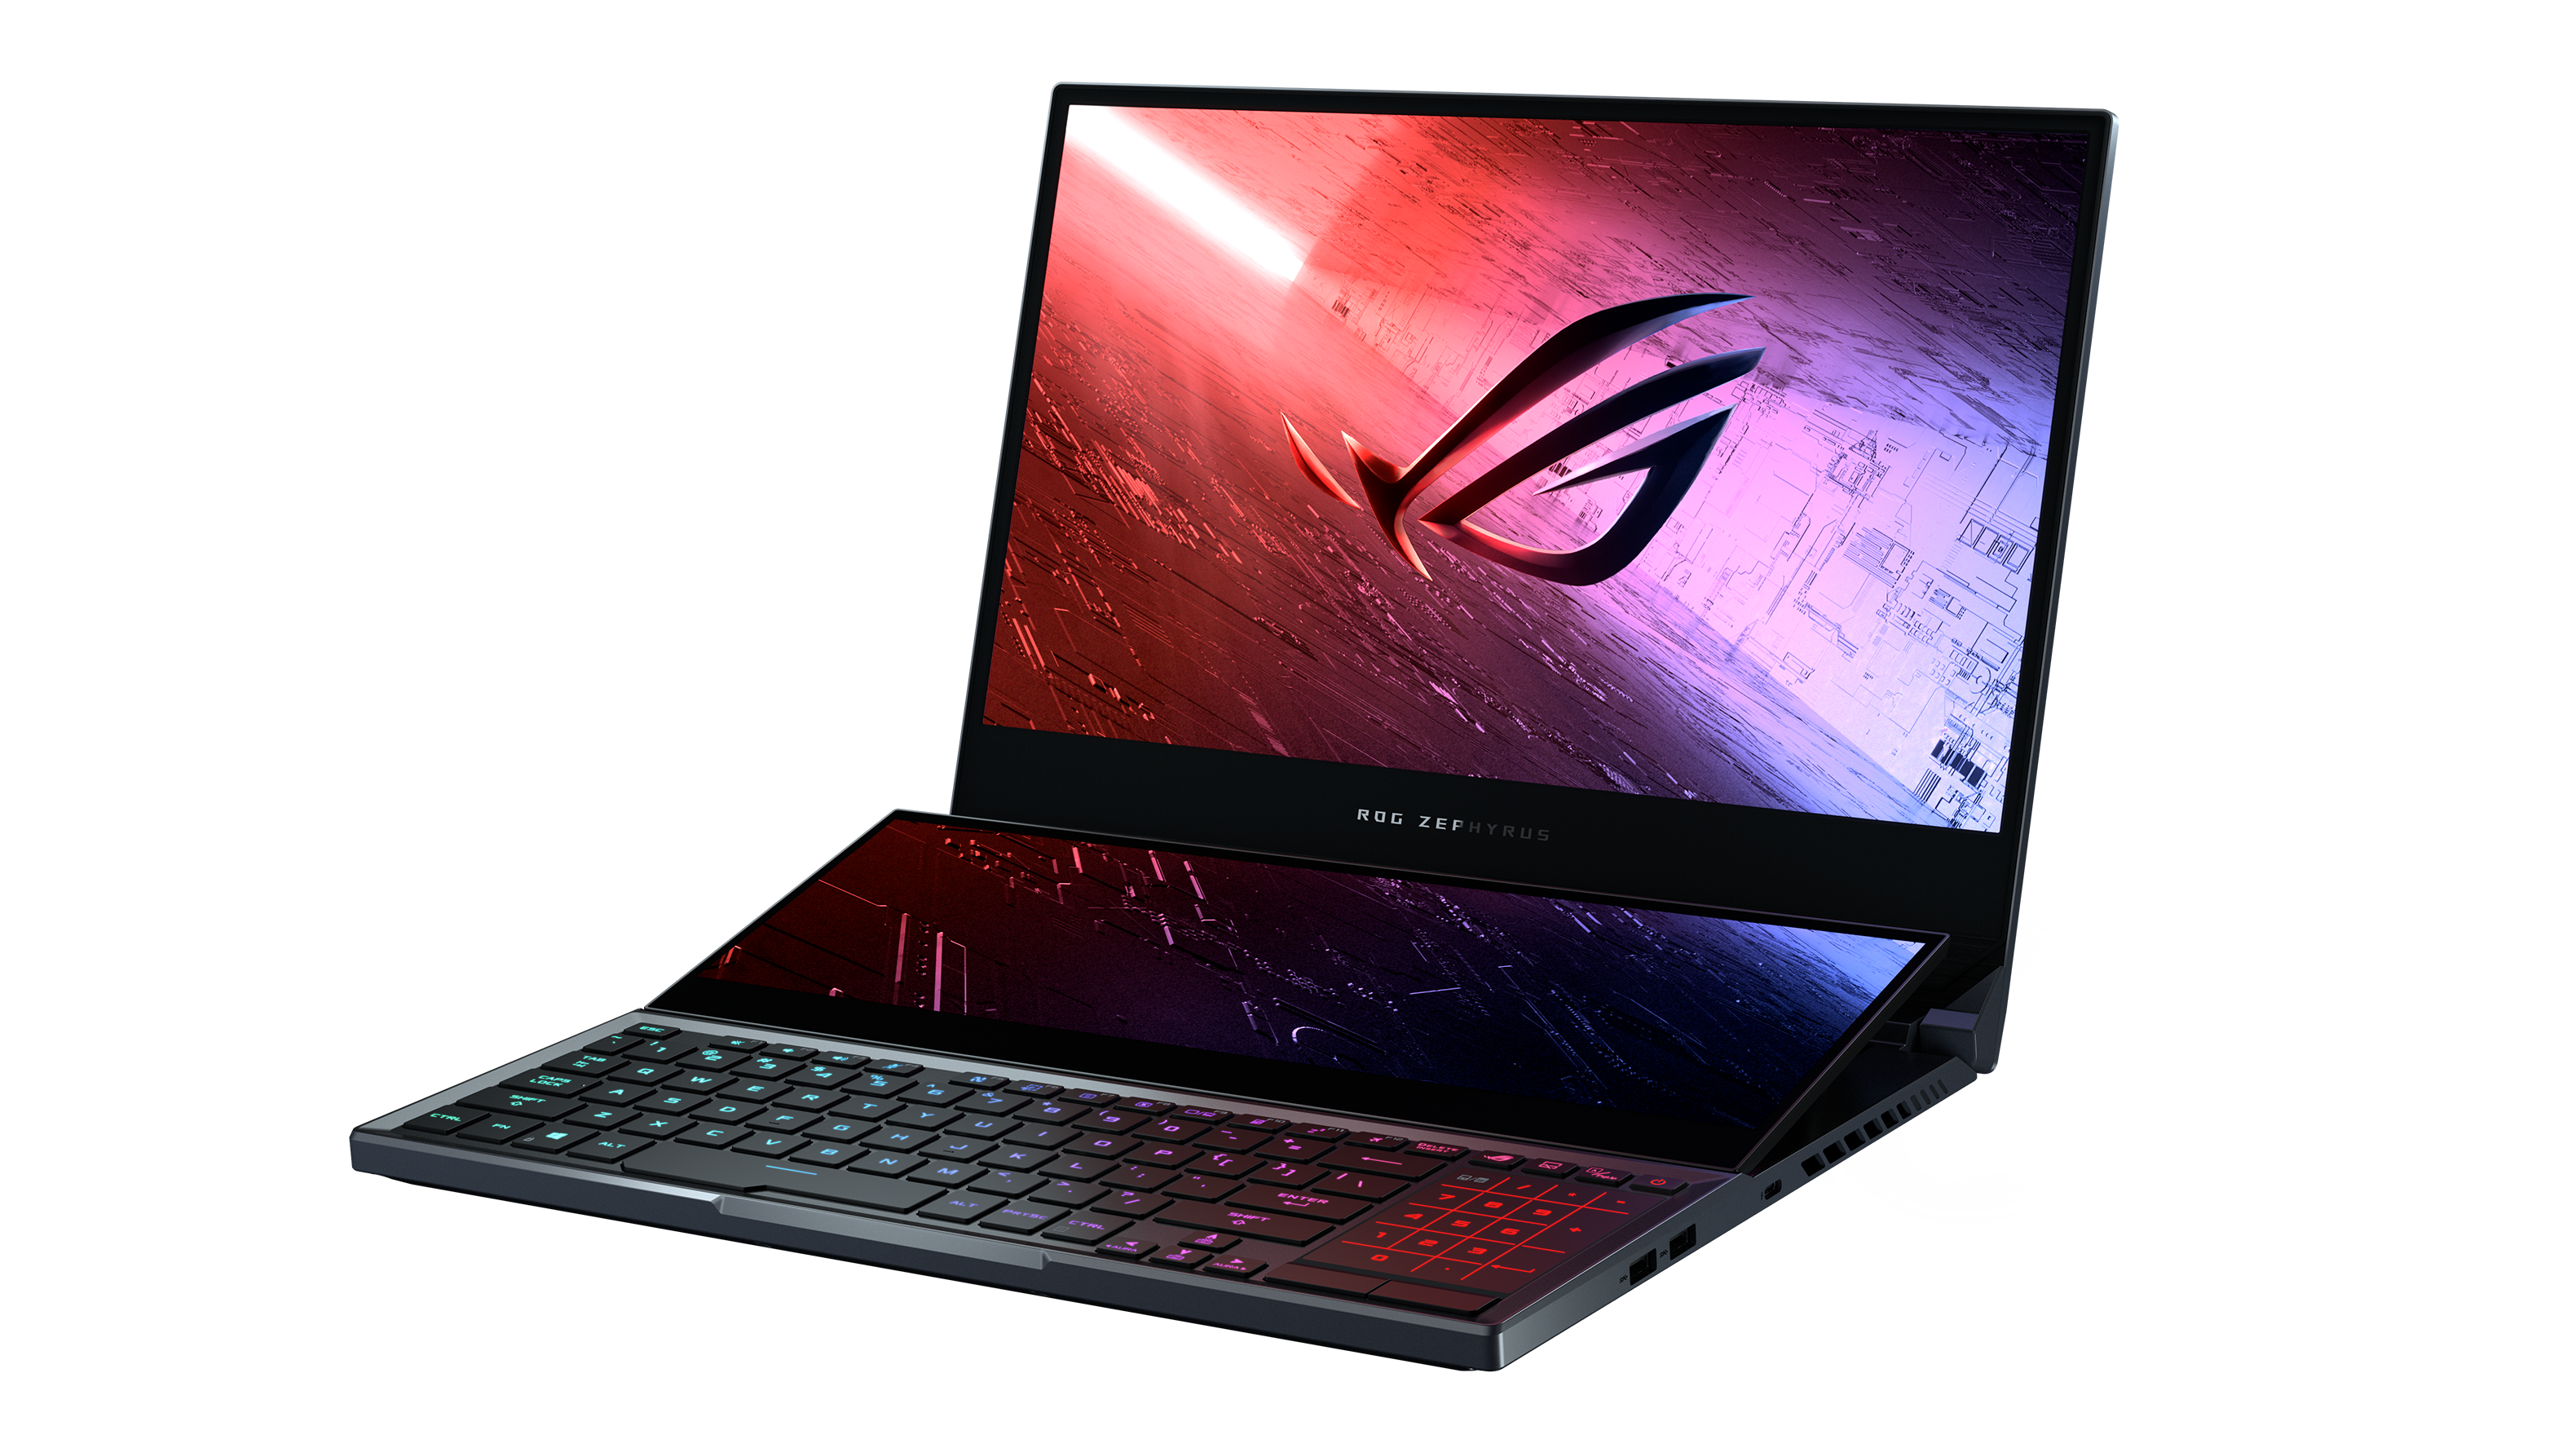 Asus unveils refreshed line of highend ROG gaming laptops